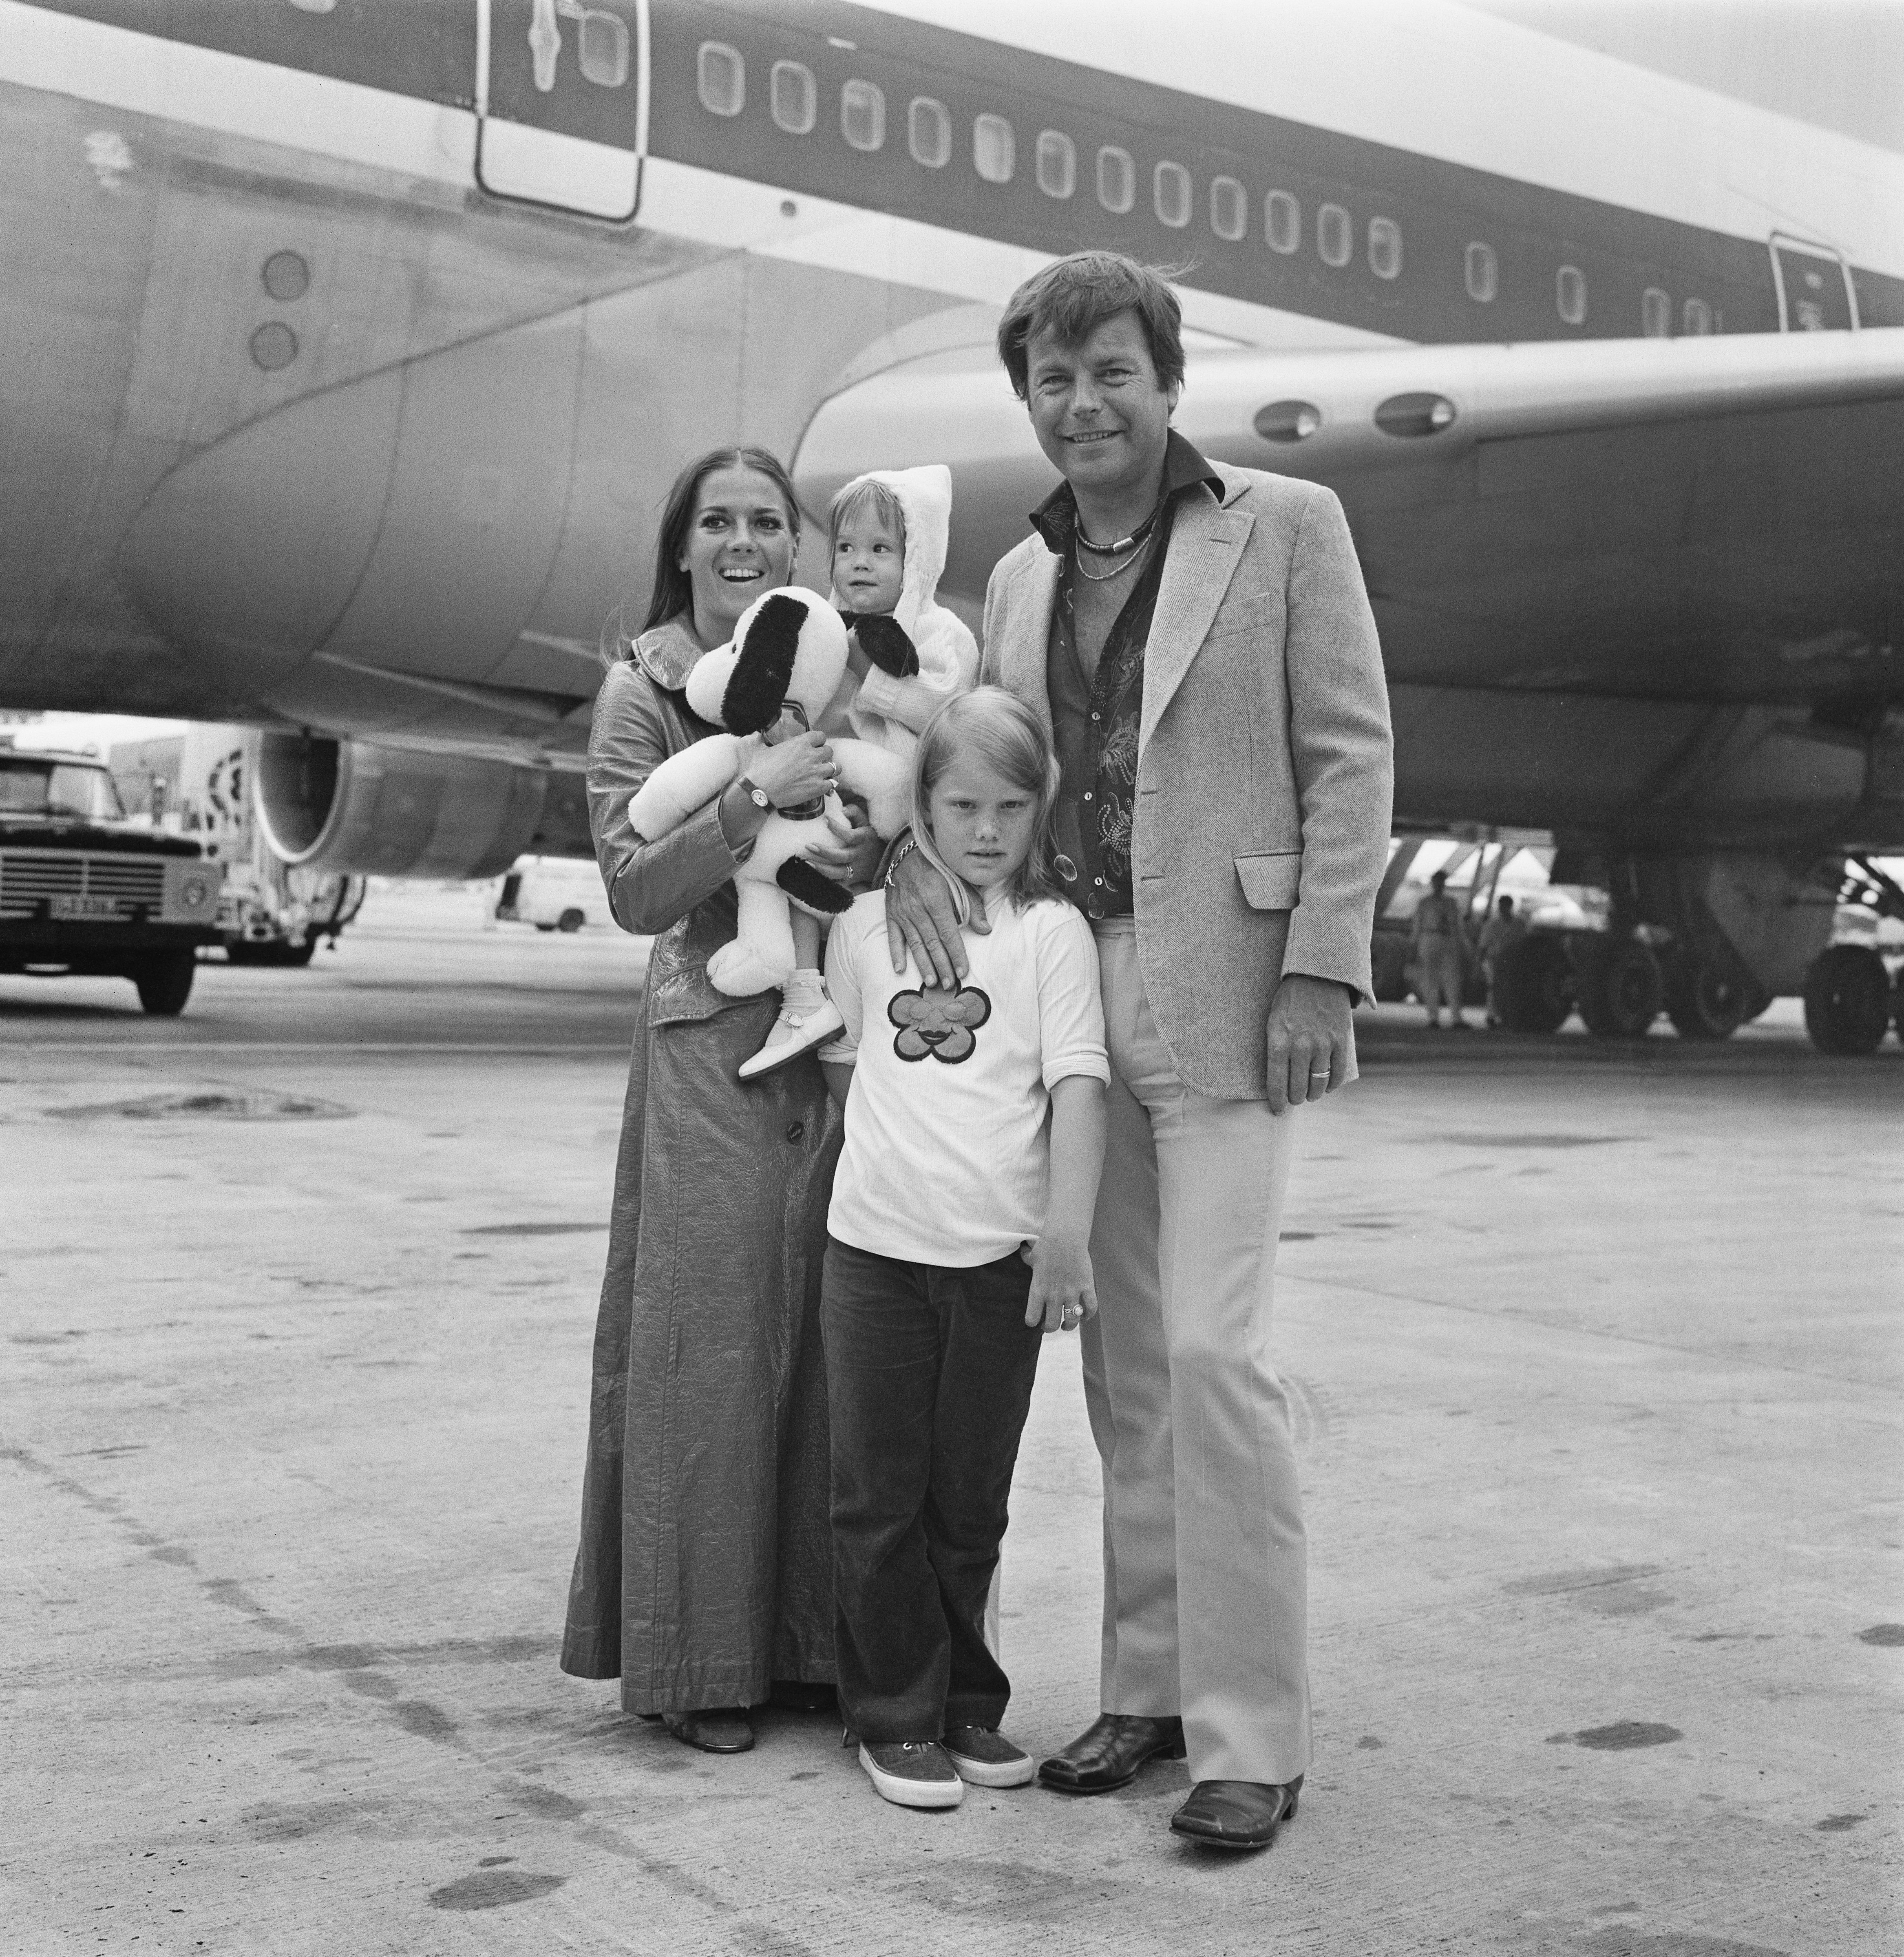 Actress Natalie Wood and her husband actor Robert Wagner with her daughter Natasha and his daughter Katie at Heathrow Airport on 4 August 1972 in London, United Kingdom ┃Source: Getty Images